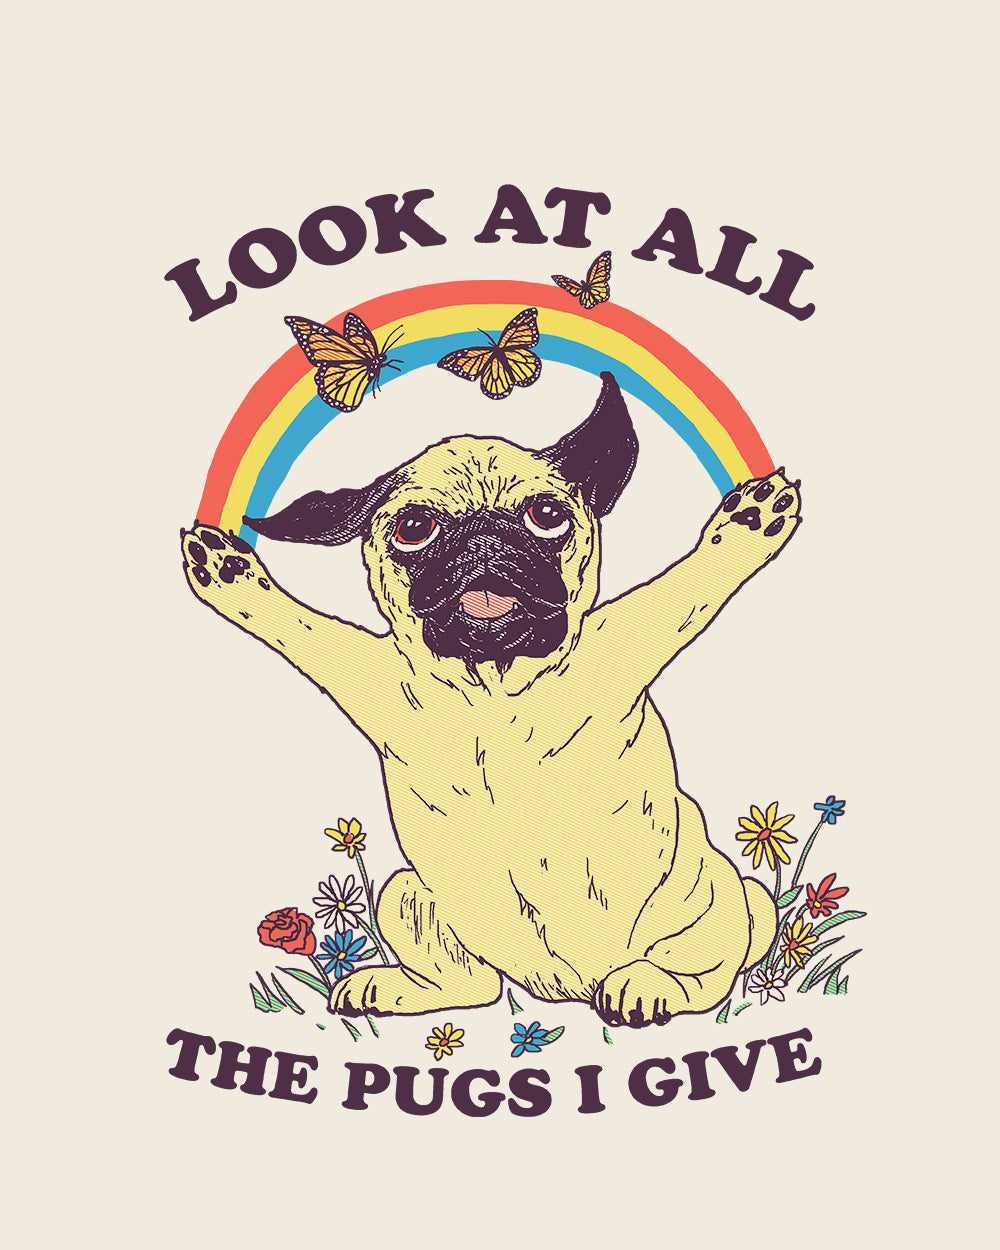 All the Pugs I Give Tote Bag Australia Online #colour_natural